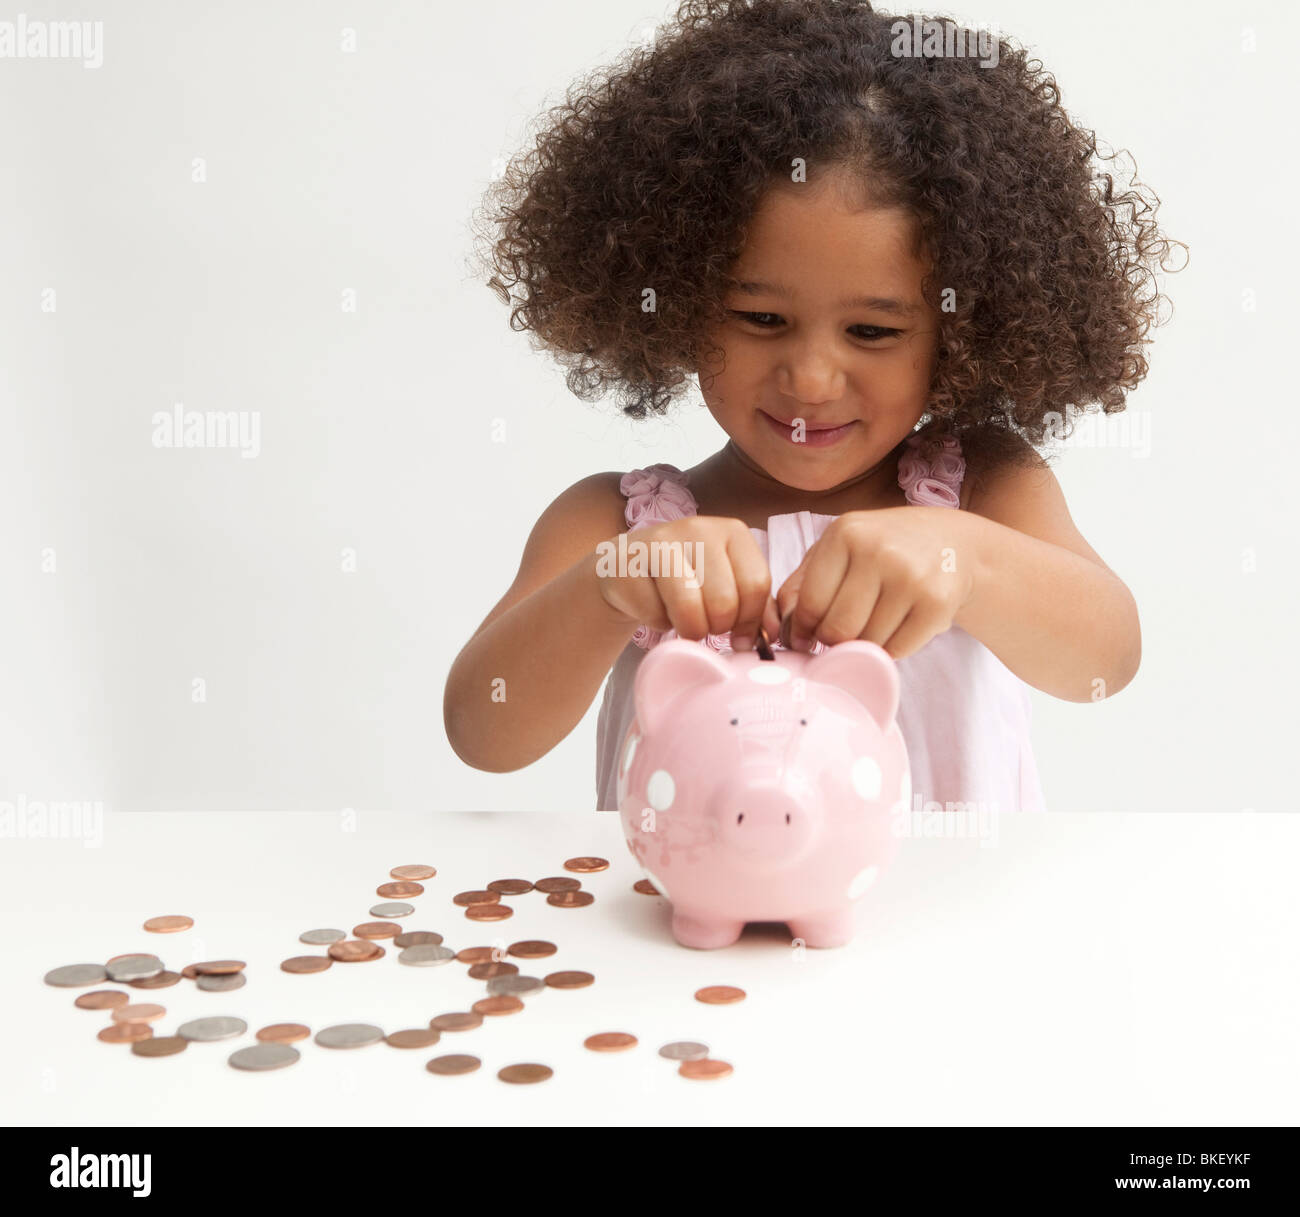 Young girl putting money in piggy bank Stock Photo